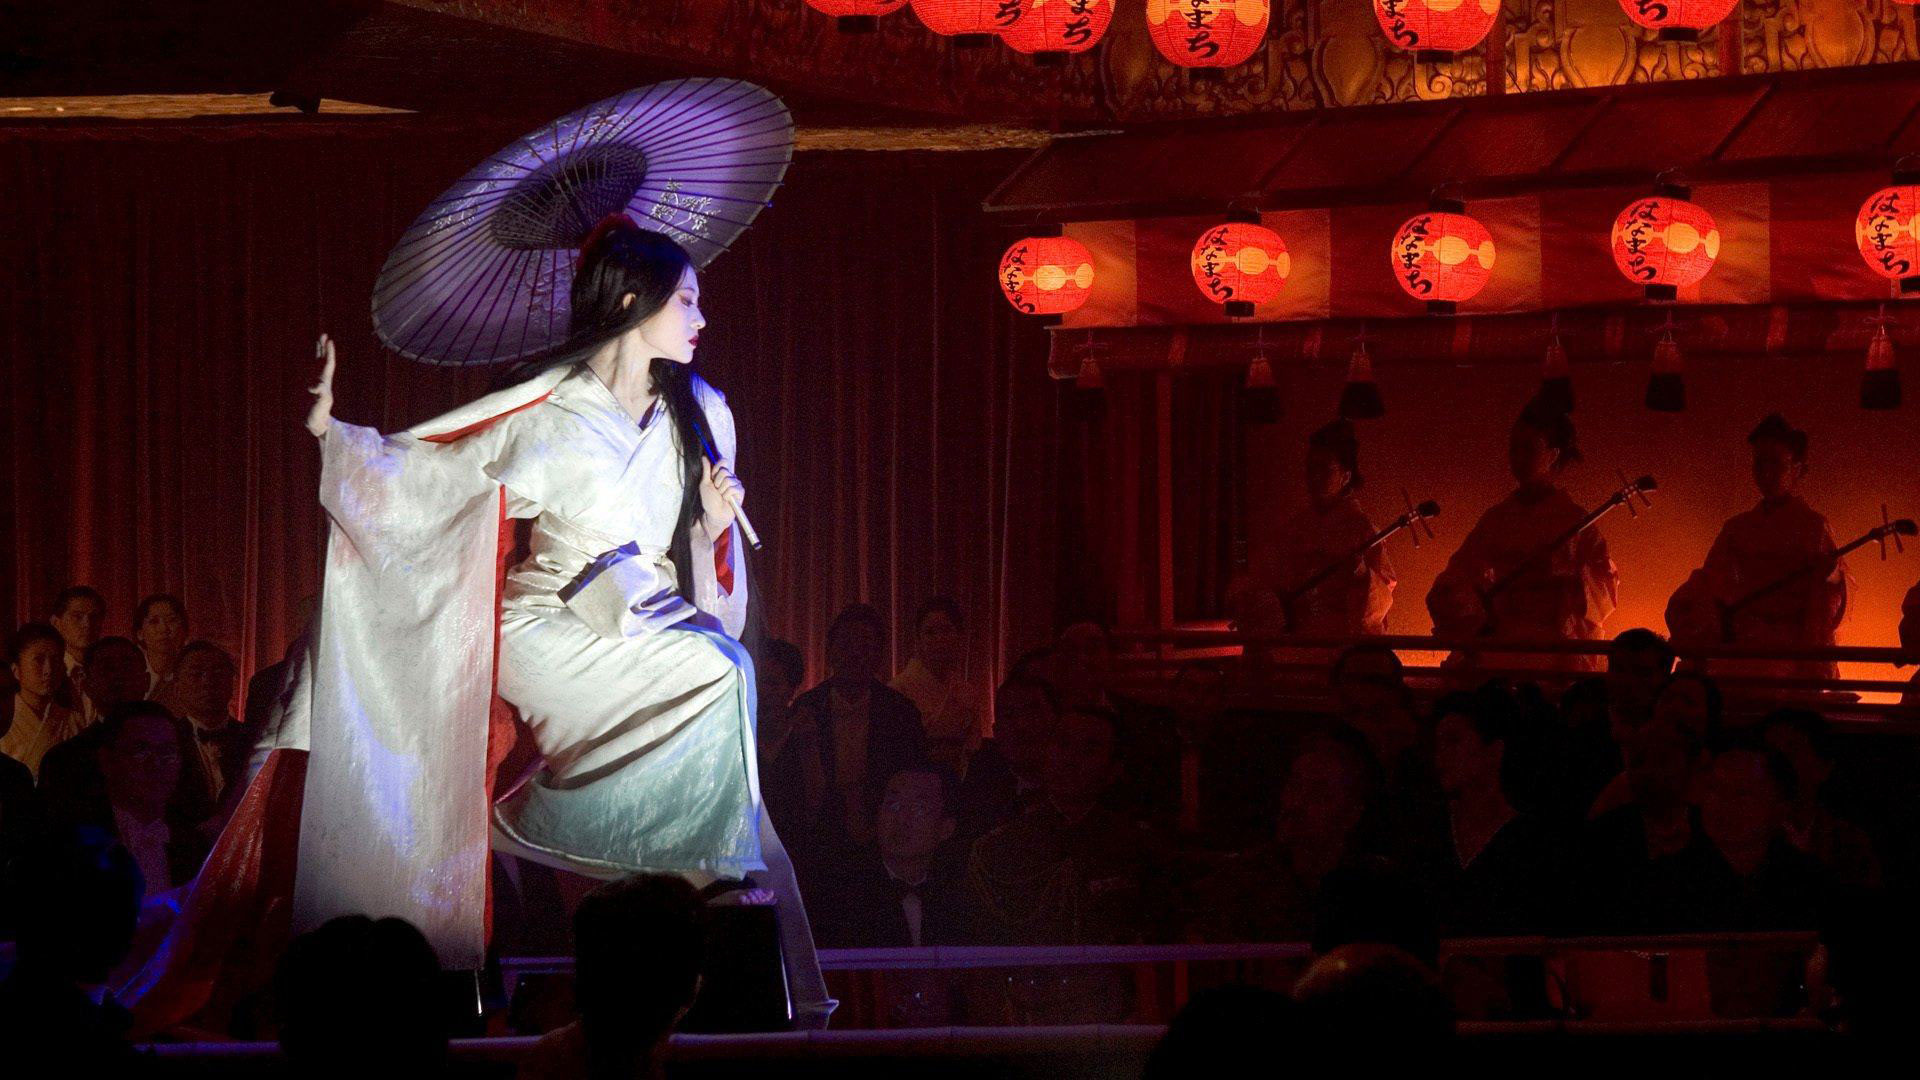 Memoirs of a Geisha: The film debuted on DVD, on March 28, 2006, Ziyi Zhang. 1920x1080 Full HD Background.